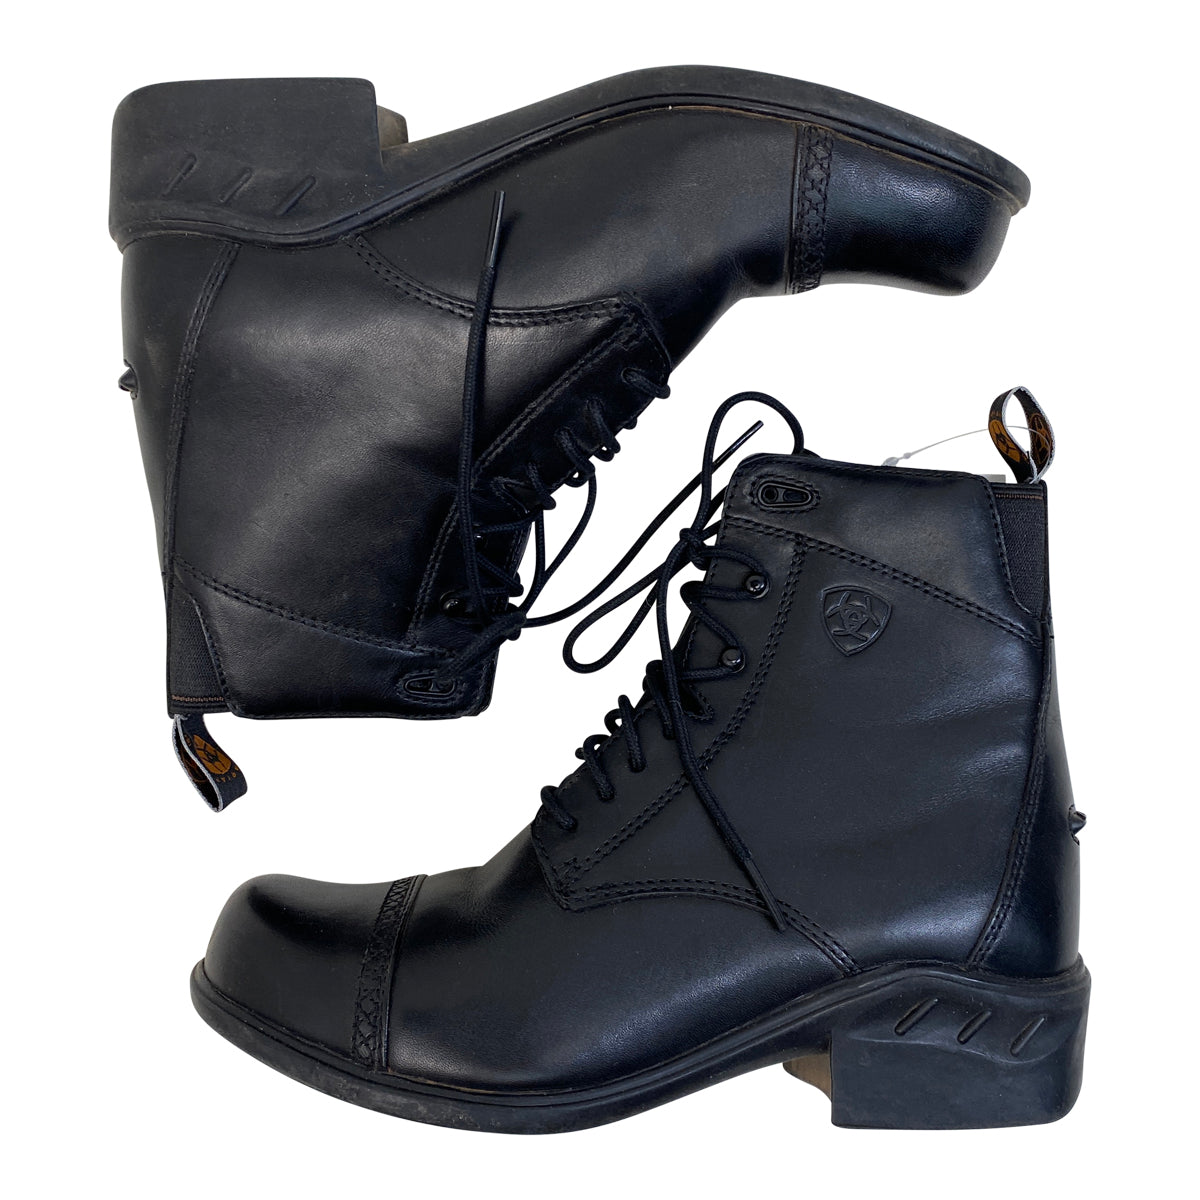 Ariat Heritage RT Paddock Boots in Black